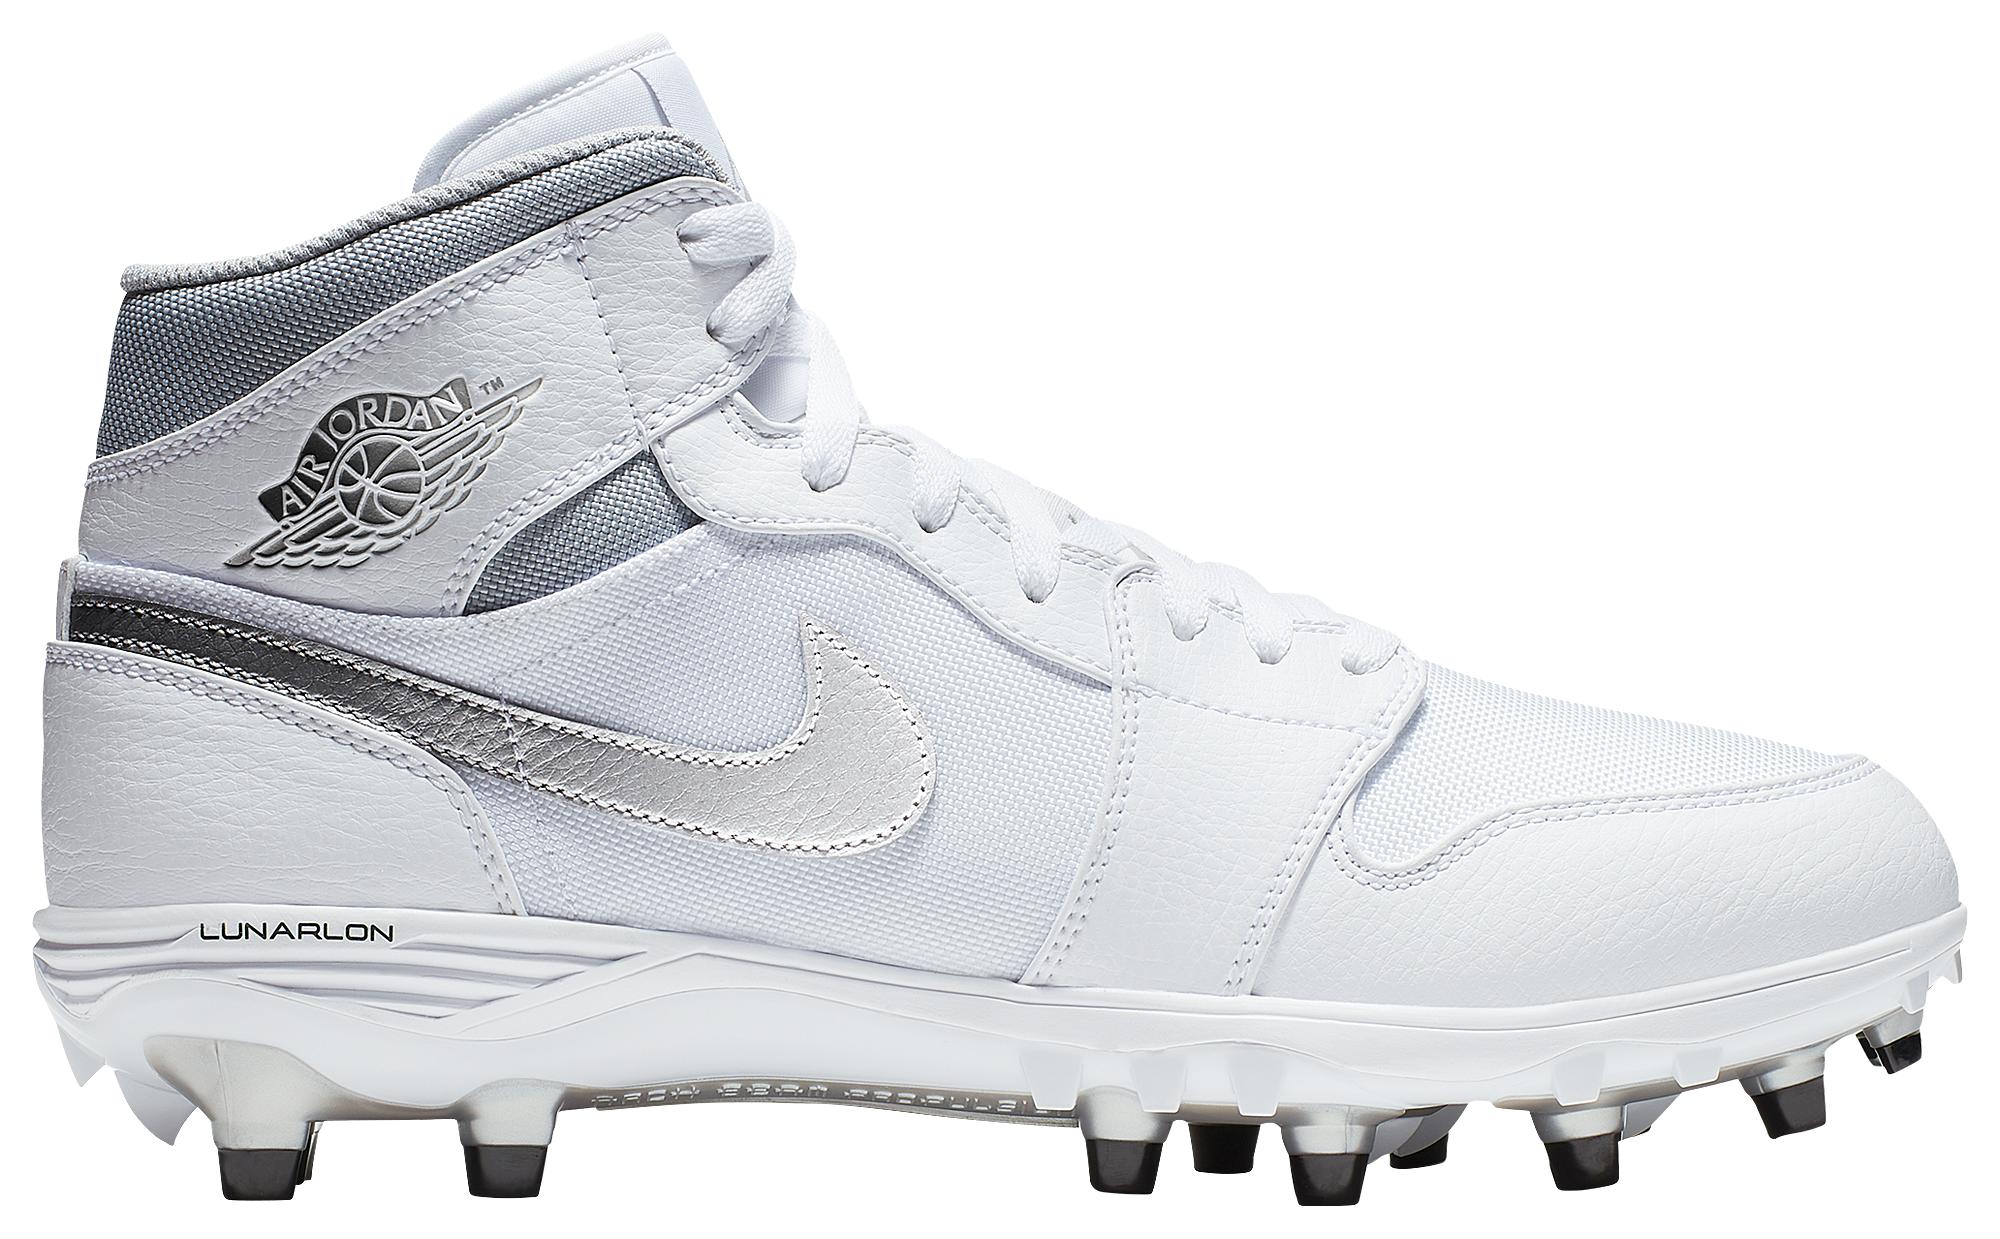 Retro 1 Td Mid Molded Cleats Shoes 